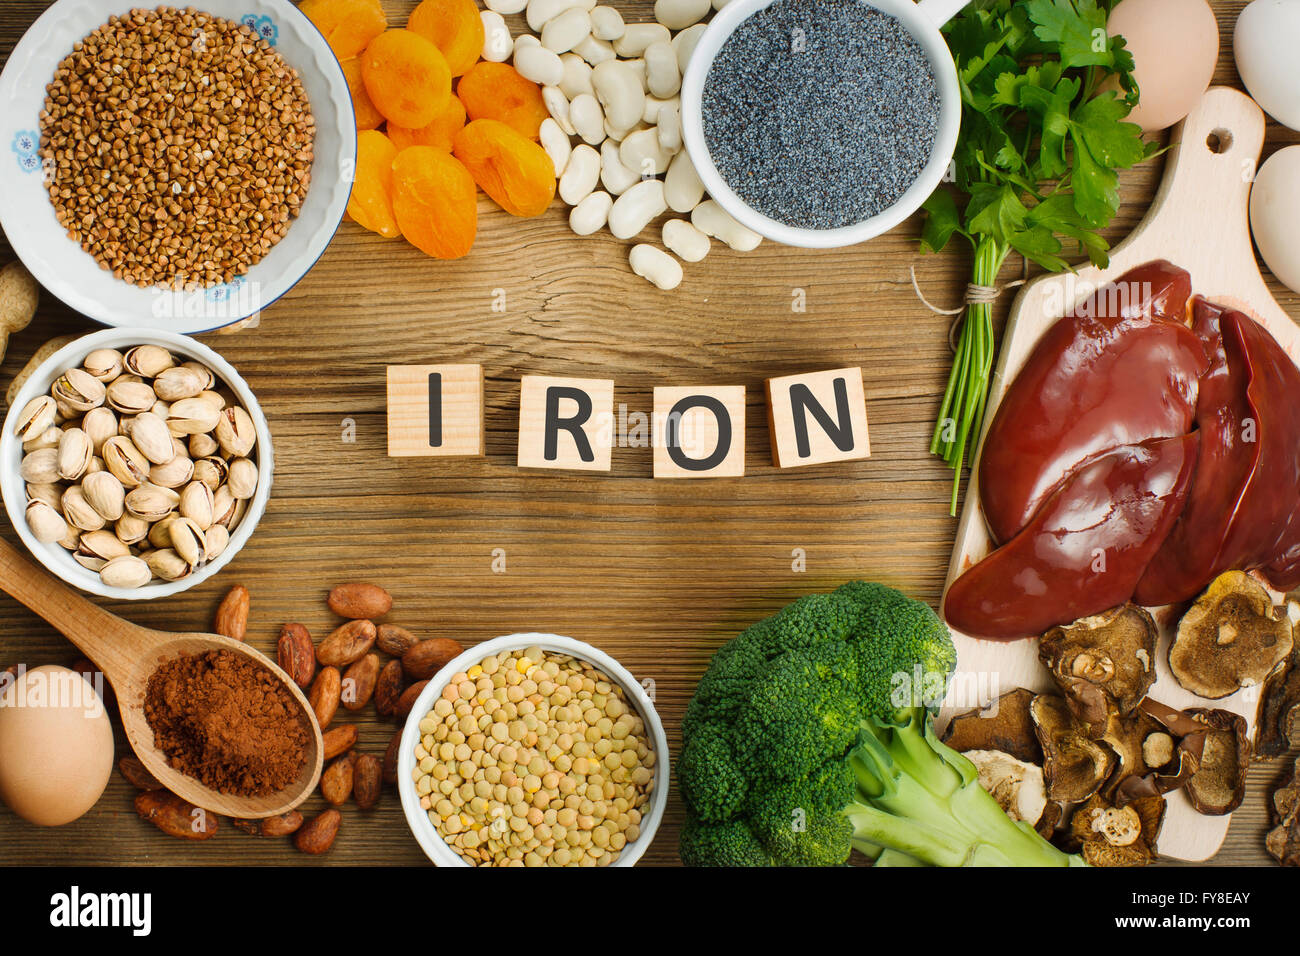 Collection iron rich foods Stock Photo